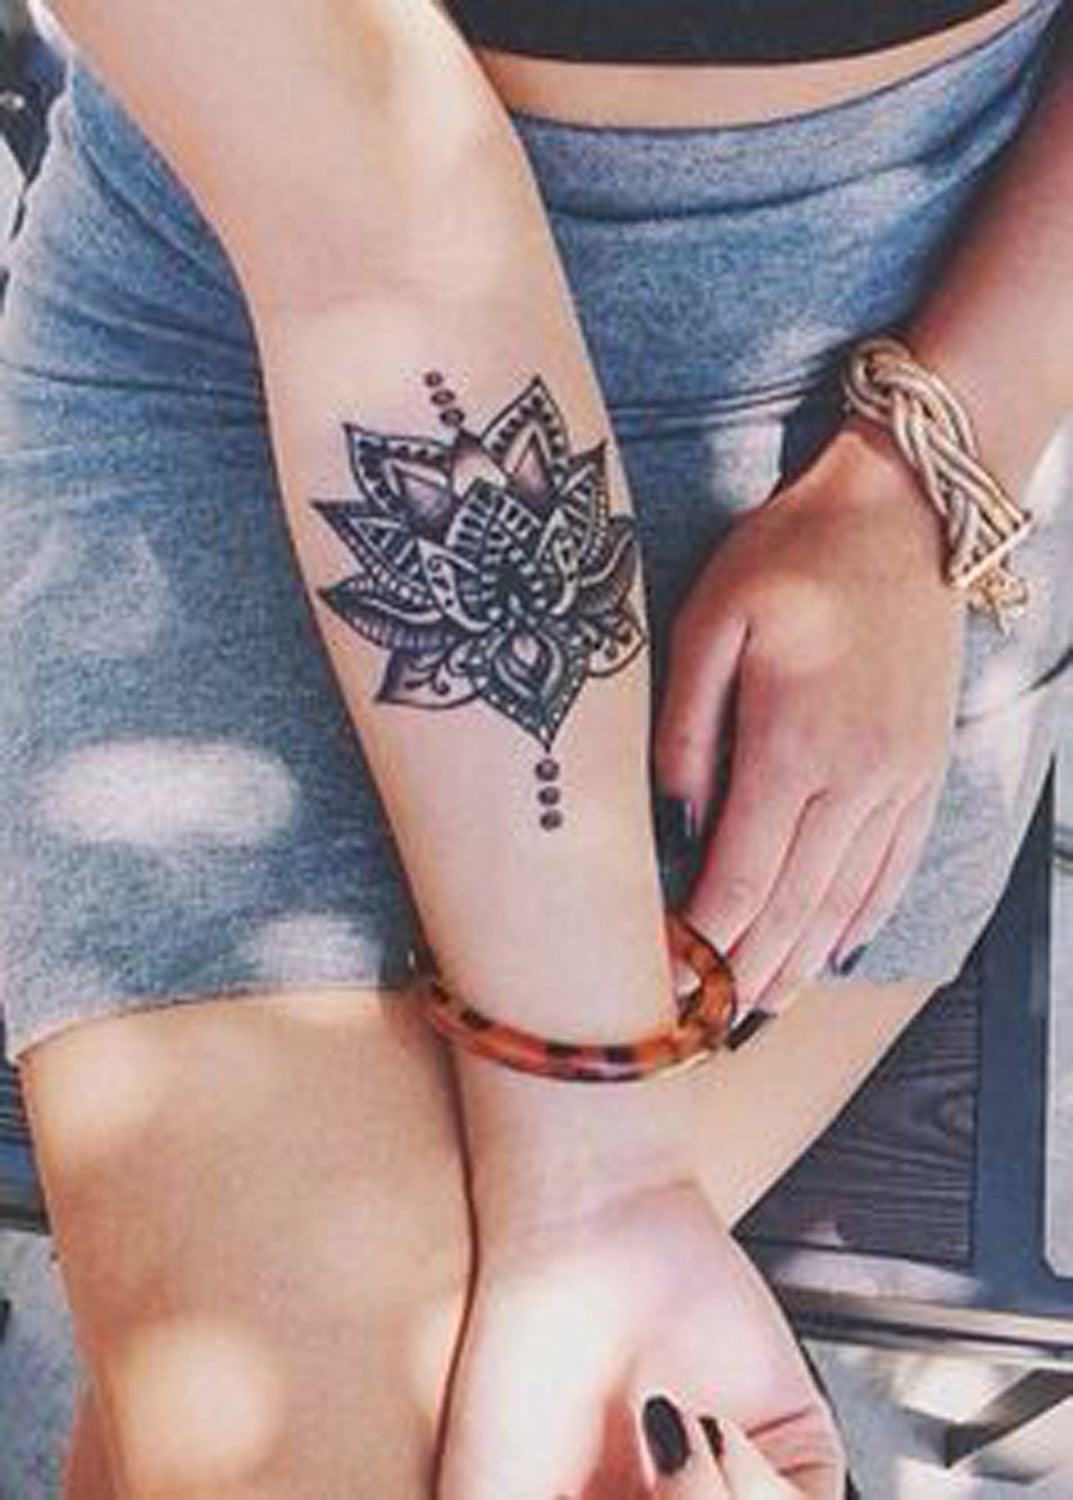 28 Lotus Flower Tattoos To Help You Find Your Zen